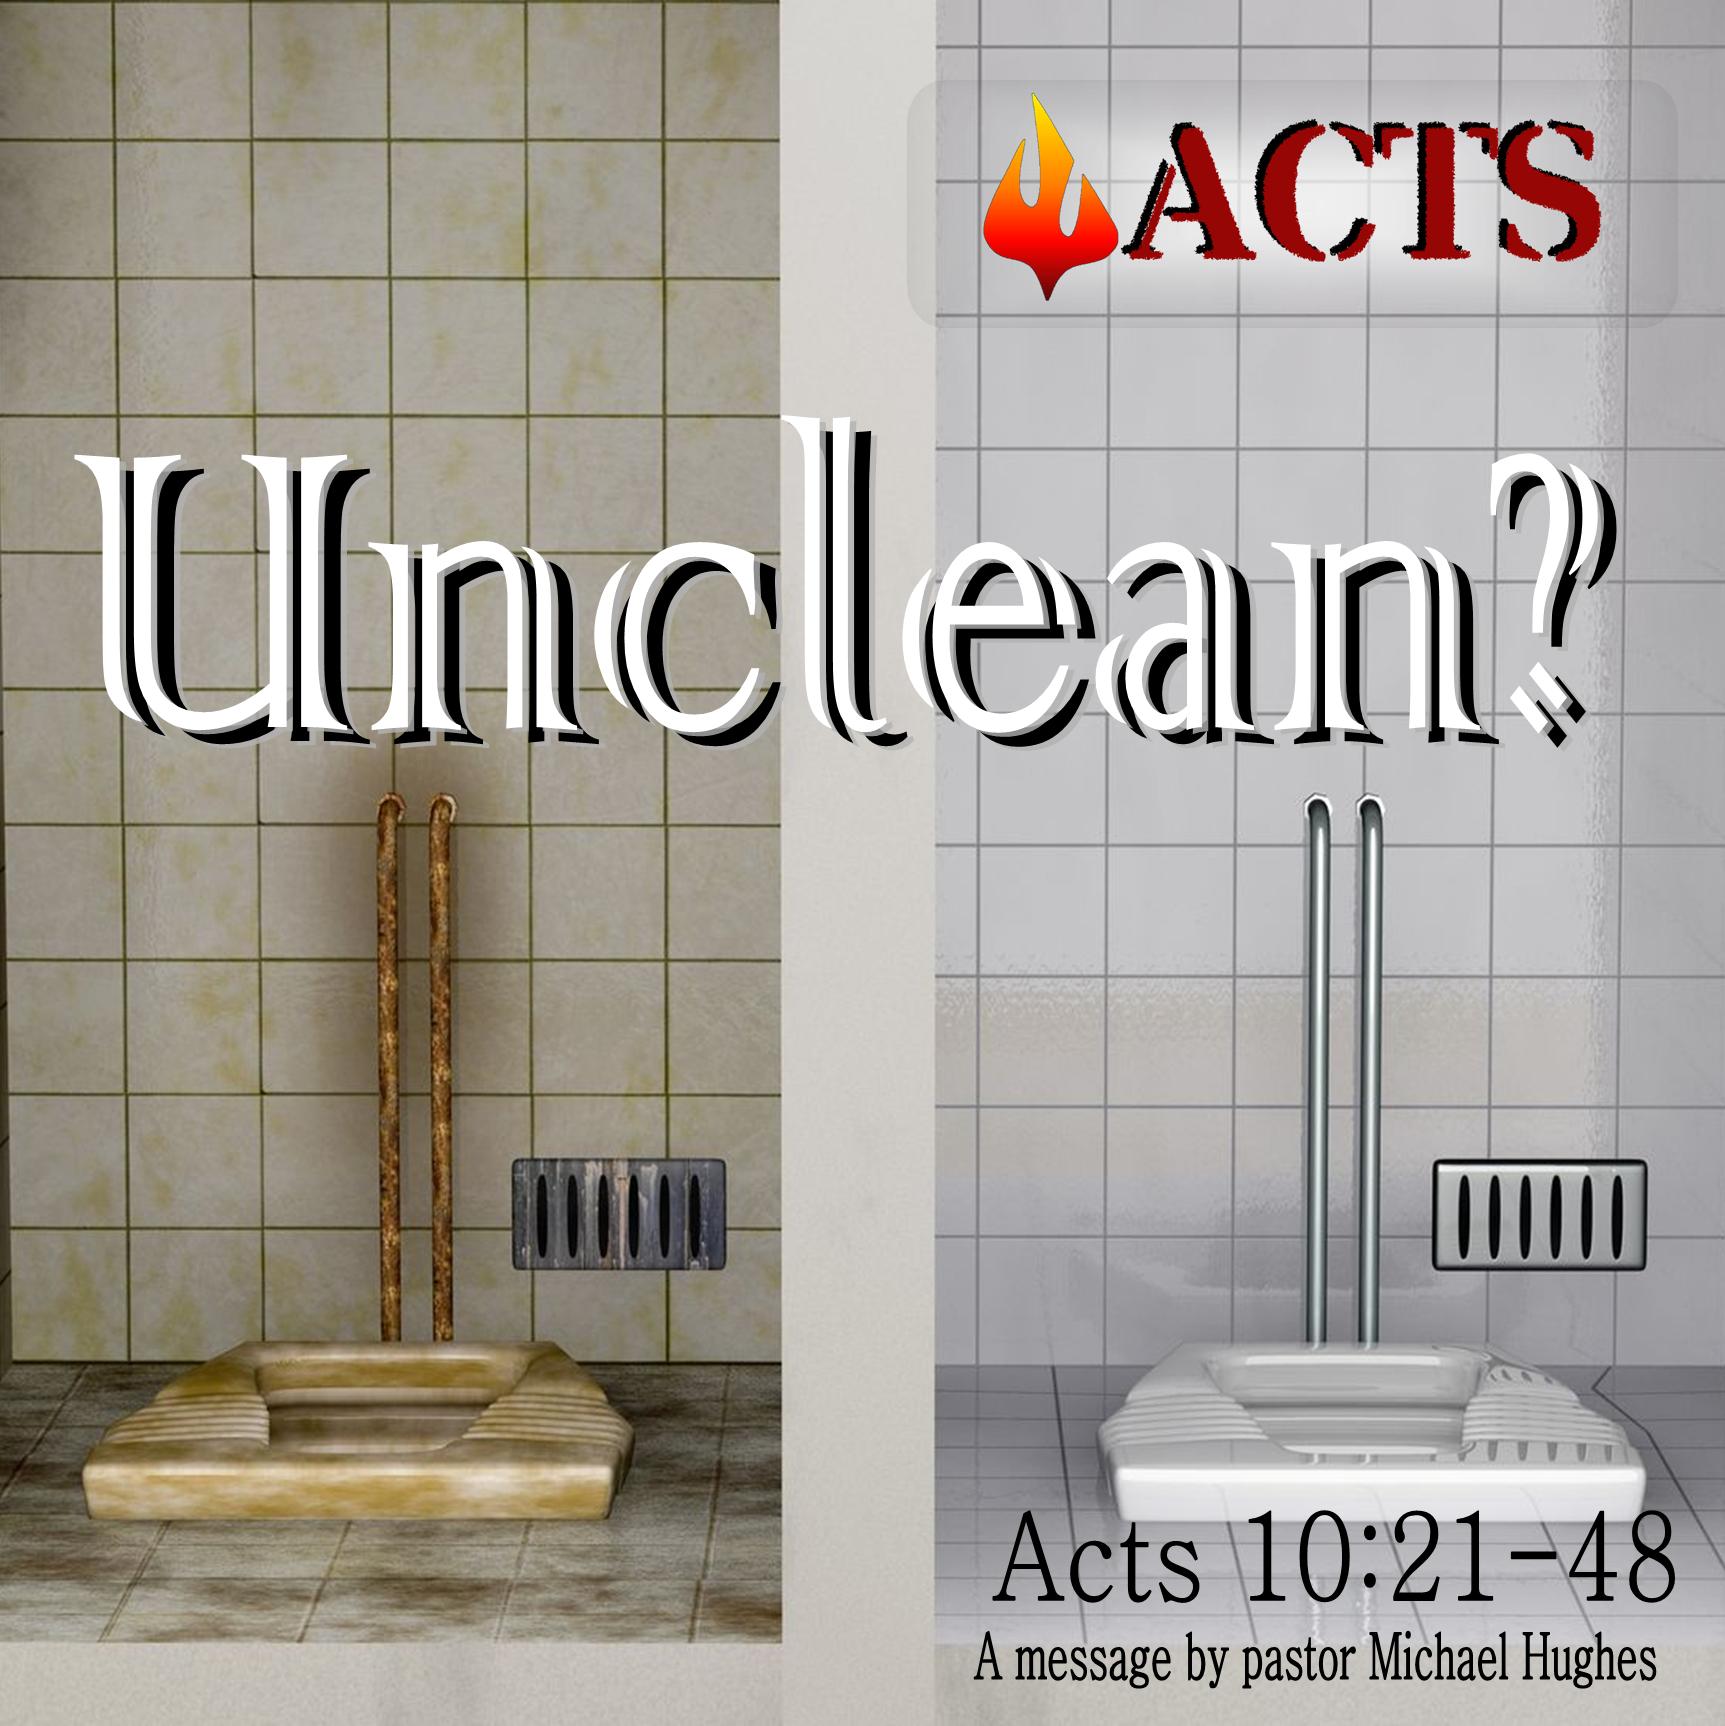 Acts 10: 21-48 Unclean?